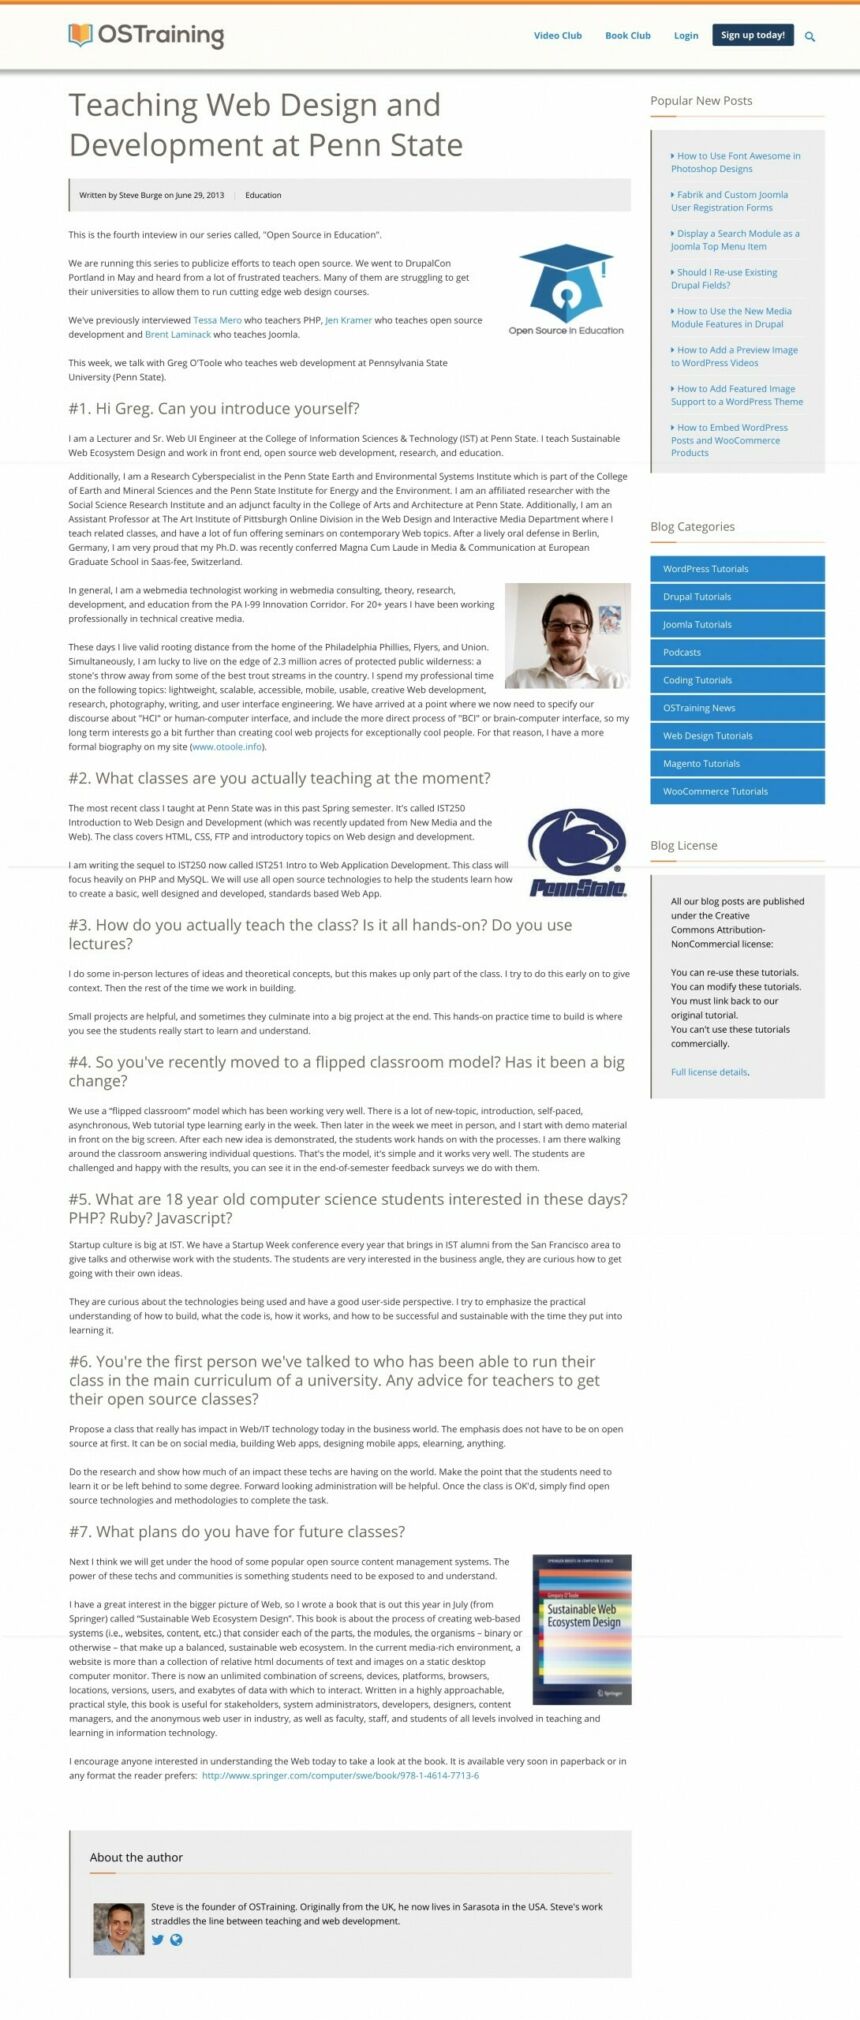 Screenshot of OSTraining.com interview with Gregory O'Toole: "Teaching Web Design and Development at Penn State"